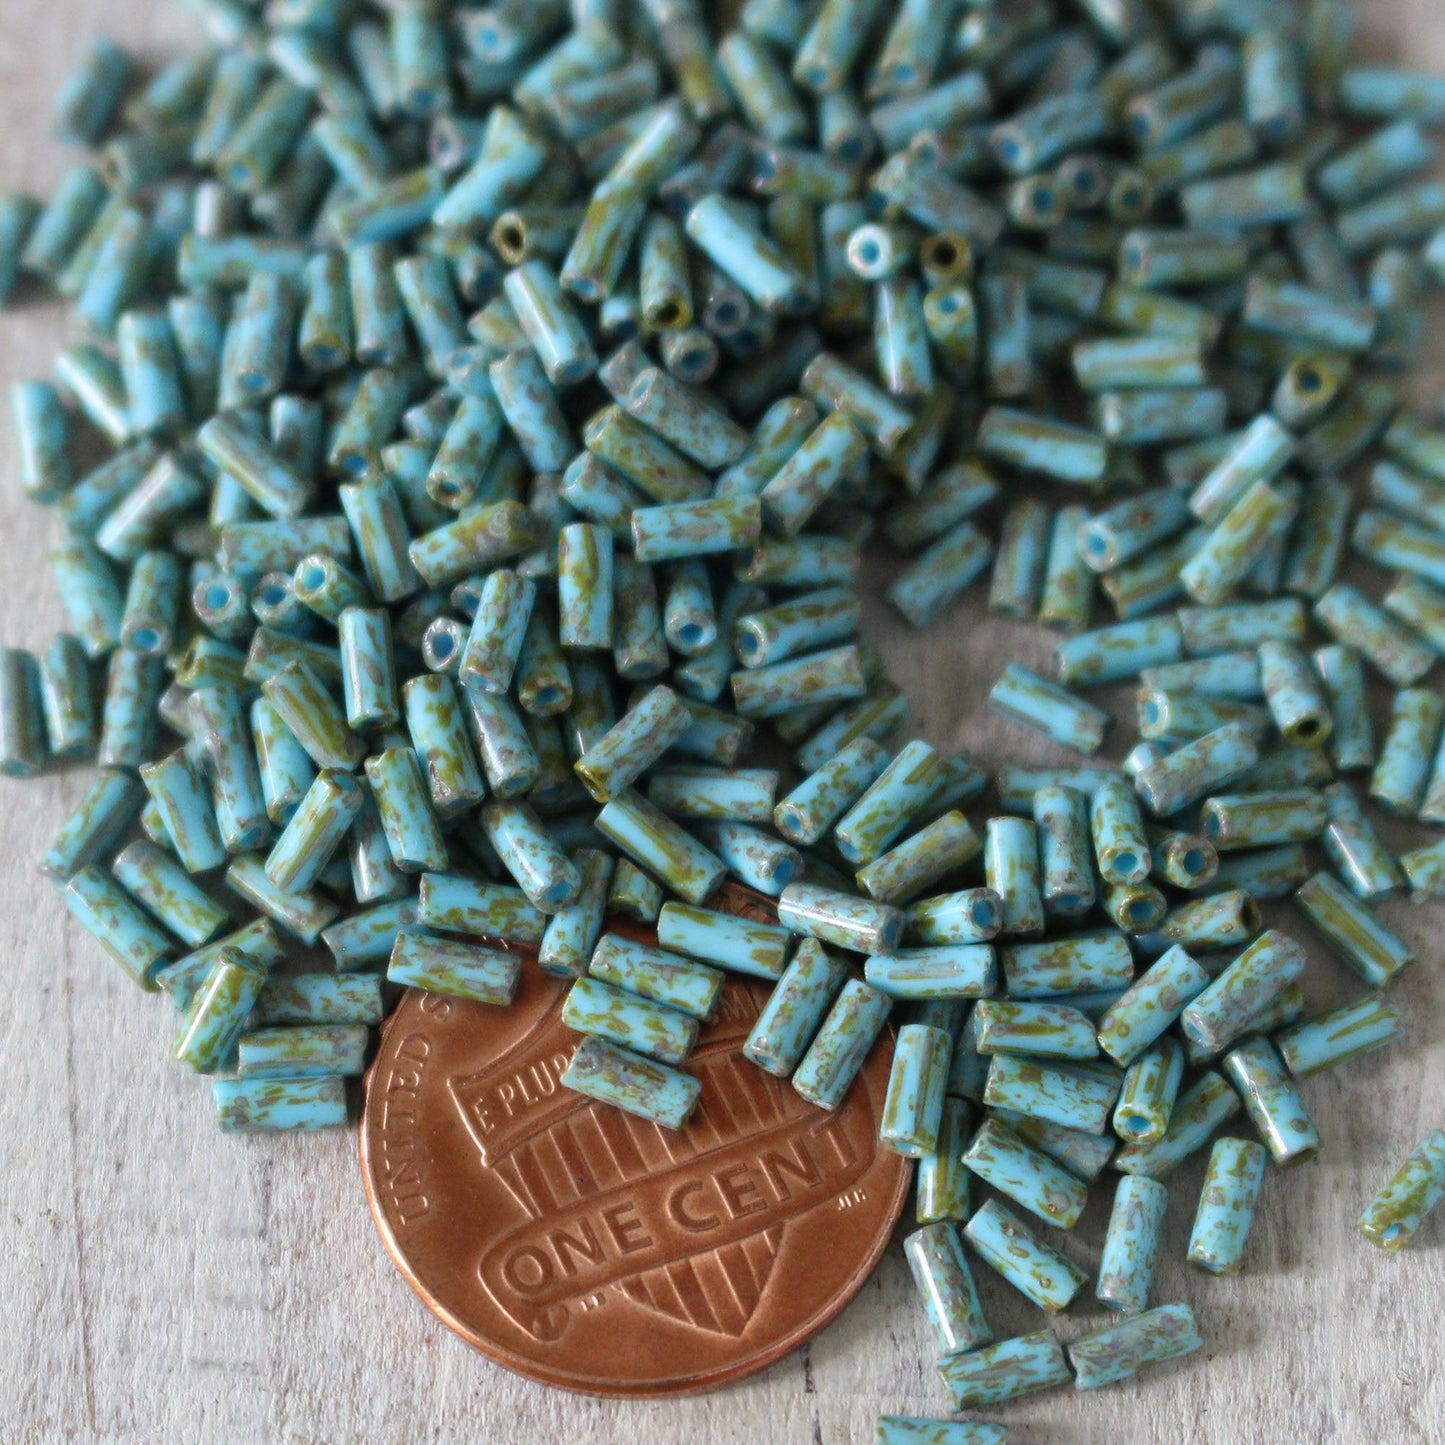 4mm Picasso Bugle Beads - Blue Turquoise Picasso  - 10 grams